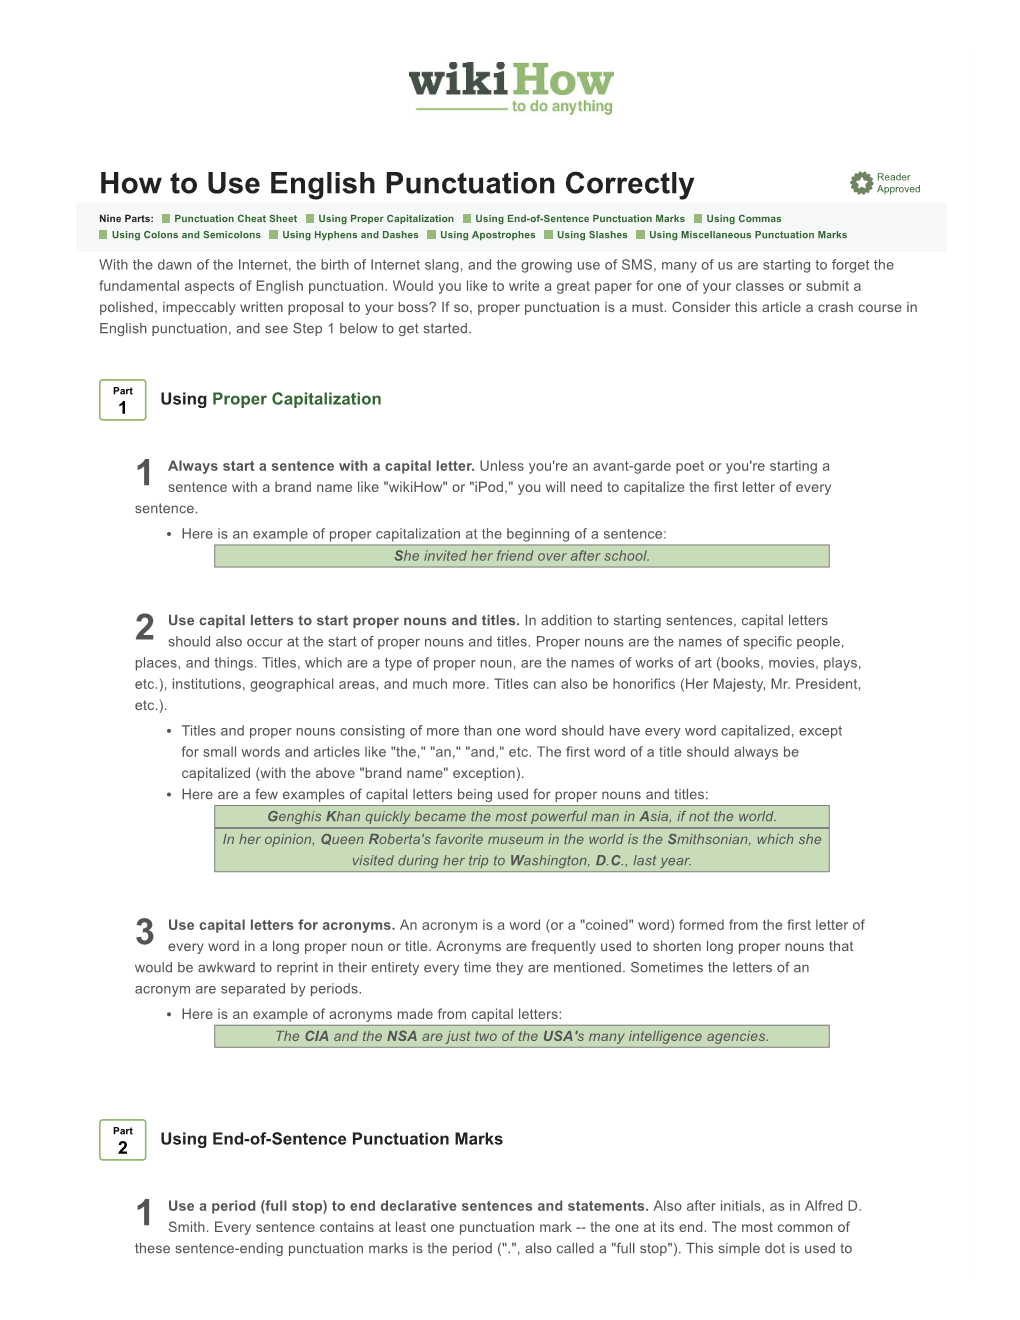 How to Use English Punctuation Correctly Approved